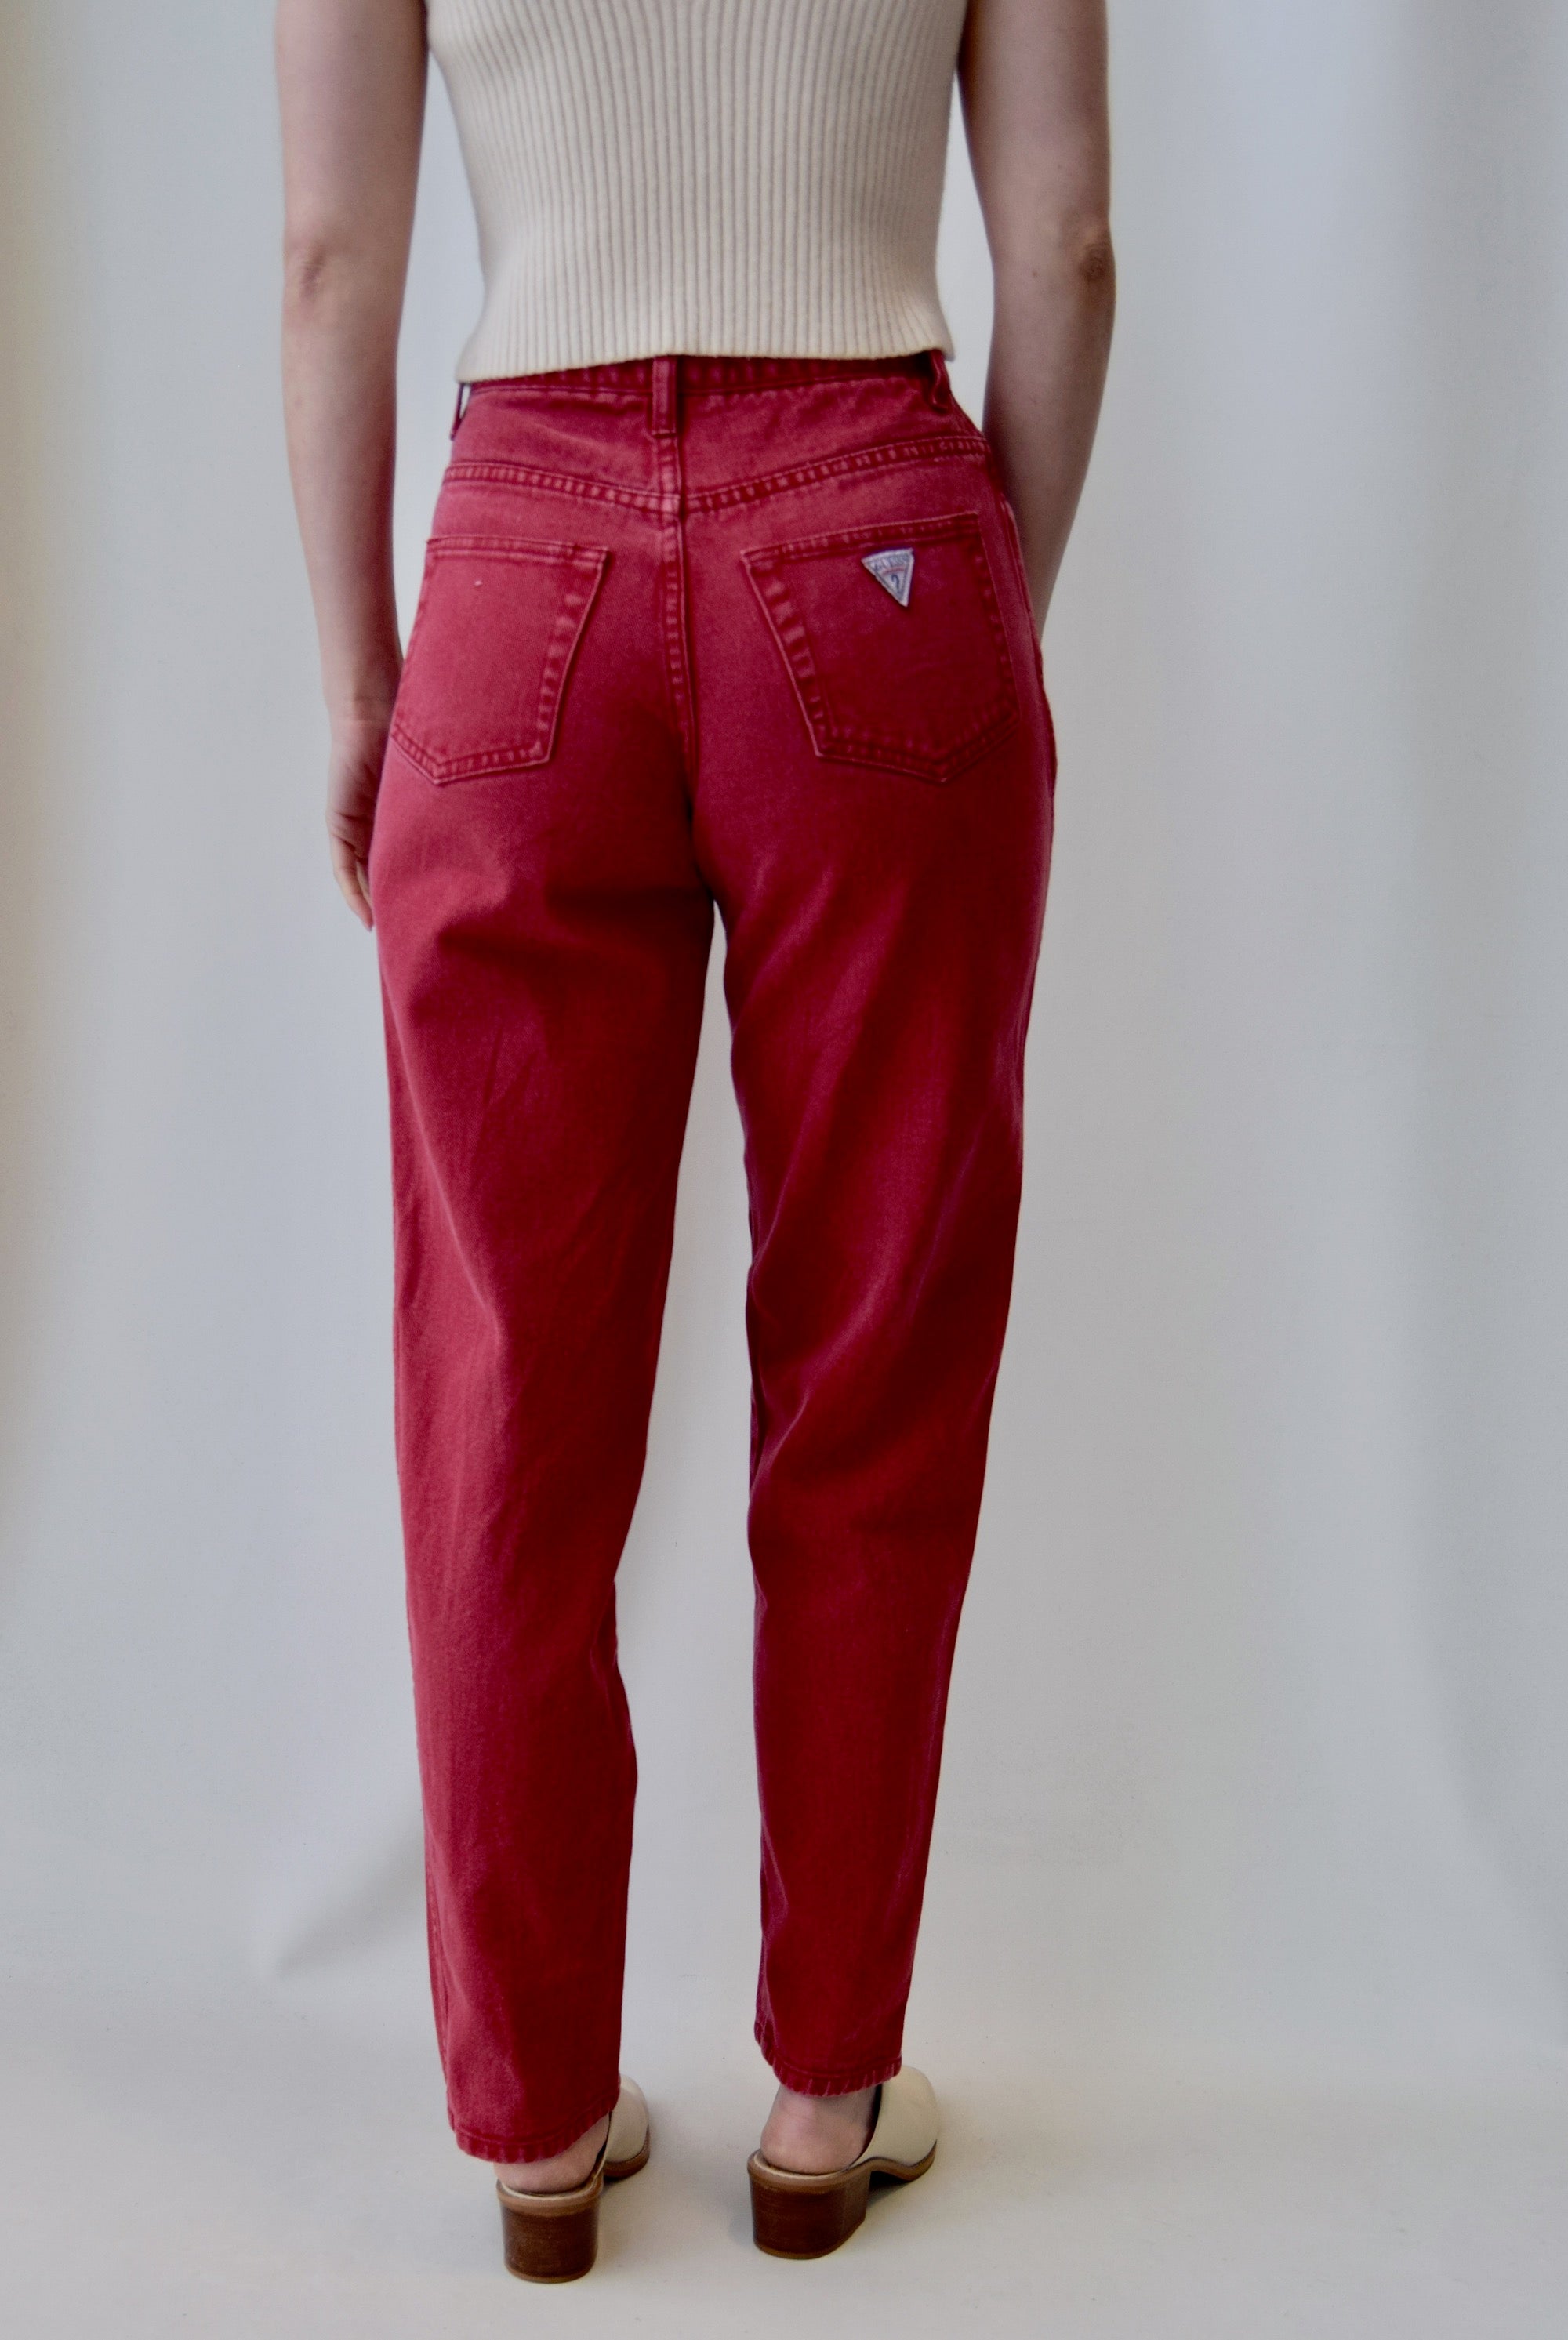 Nineties Faded Red Rose "Guess" Jeans